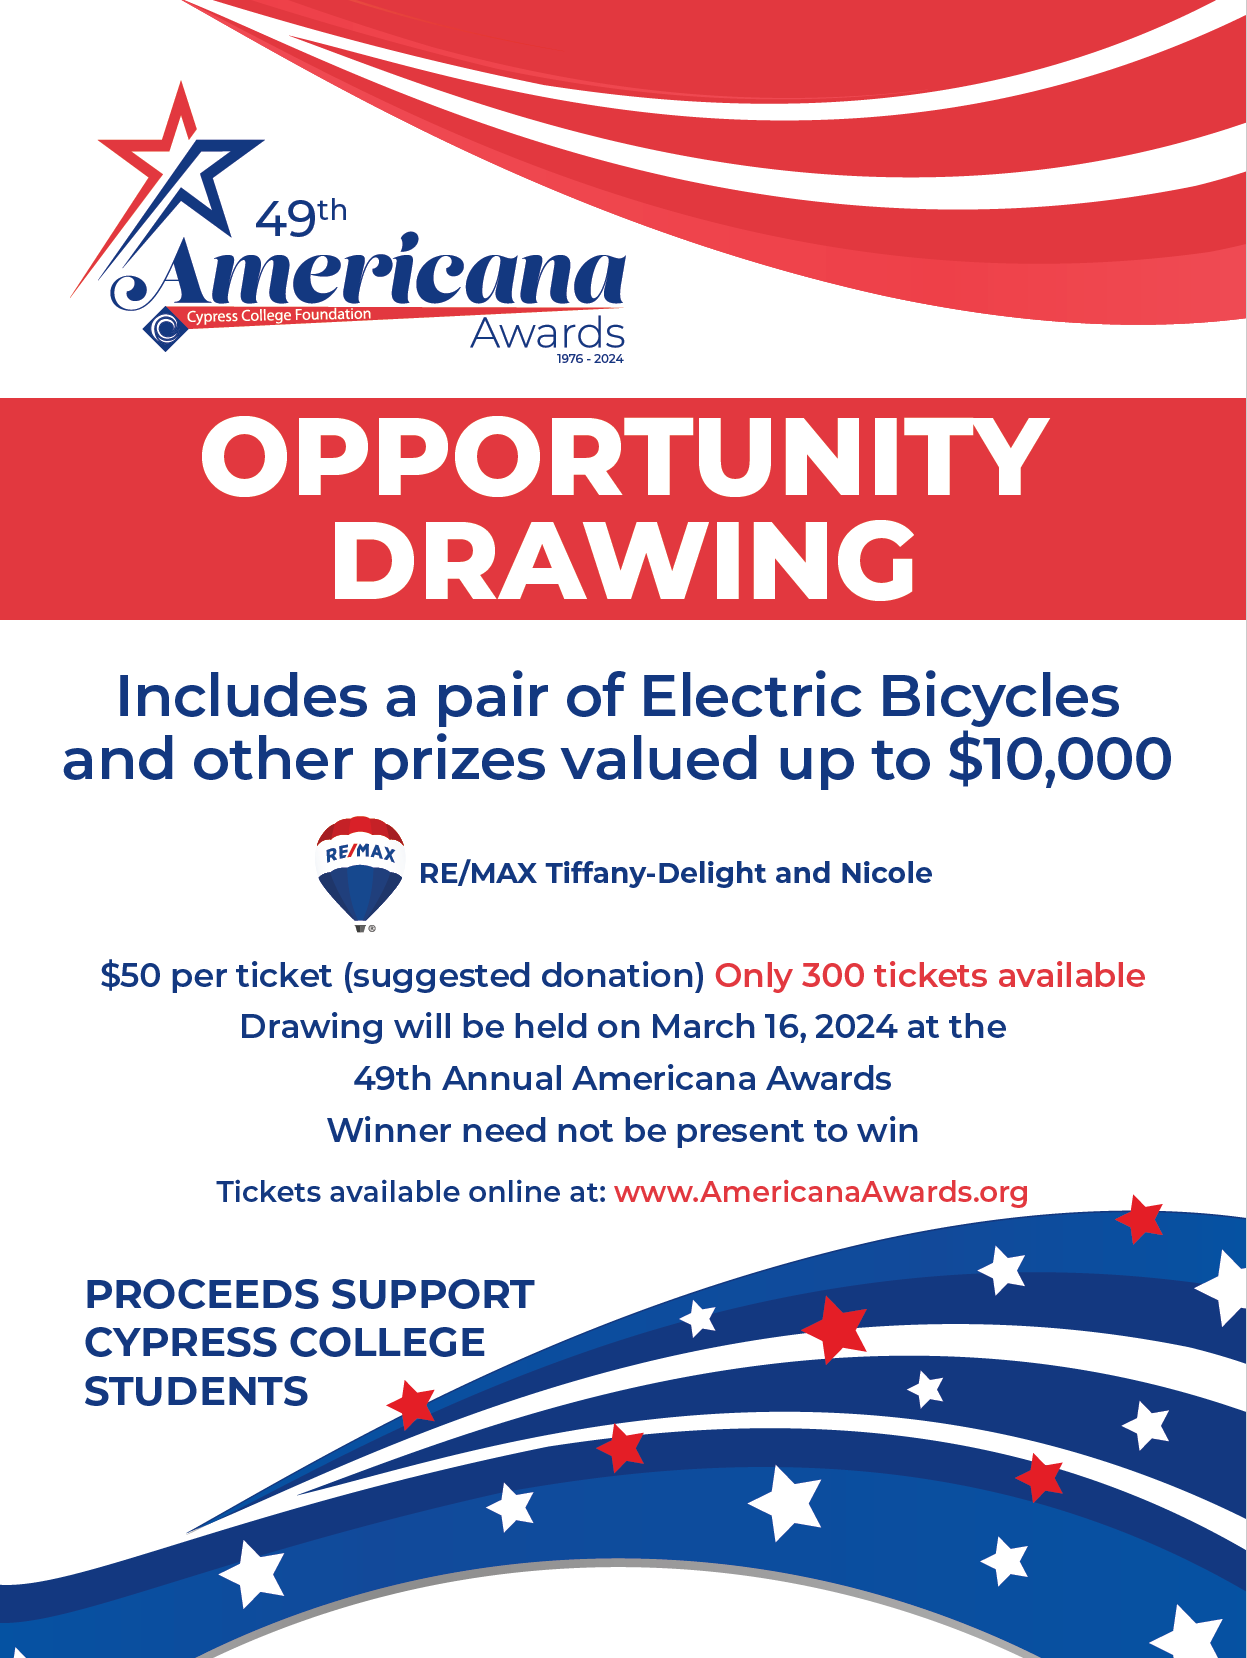 Opportunity Drawing, Includes a pair of Electric Bicycles and other prizes valued up to $10,000. $50 per ticket (suggested donation) Only 300 tickets available. Drawing will be held on March 16, 2024 at the 49th annual Americana Awards. Winner need not be present to win. Tickets available www.AmericanaAwards.org